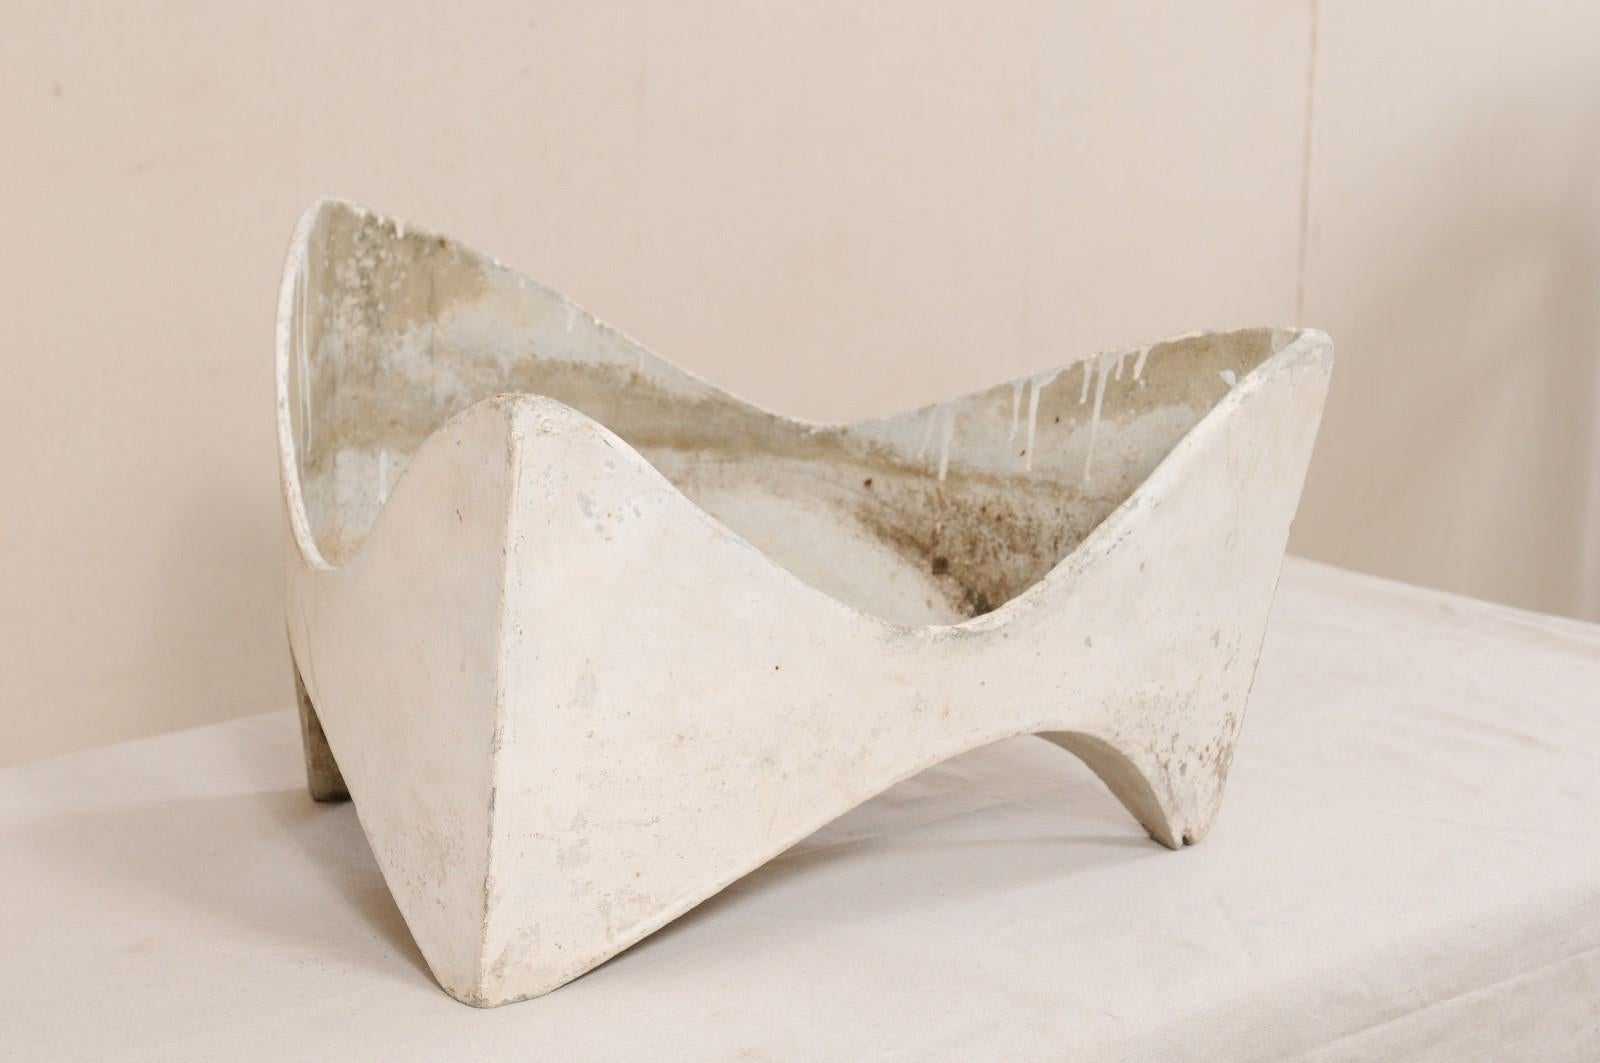 A rare style, midcentury Willy Guhl abstract triangular sculptural planter. This planter was designed by Swiss neo-functionalist designer Willy Guhl (1915-2004) for Eternit during the 1950s, Switzerland. The planter is constructed of eternite (a